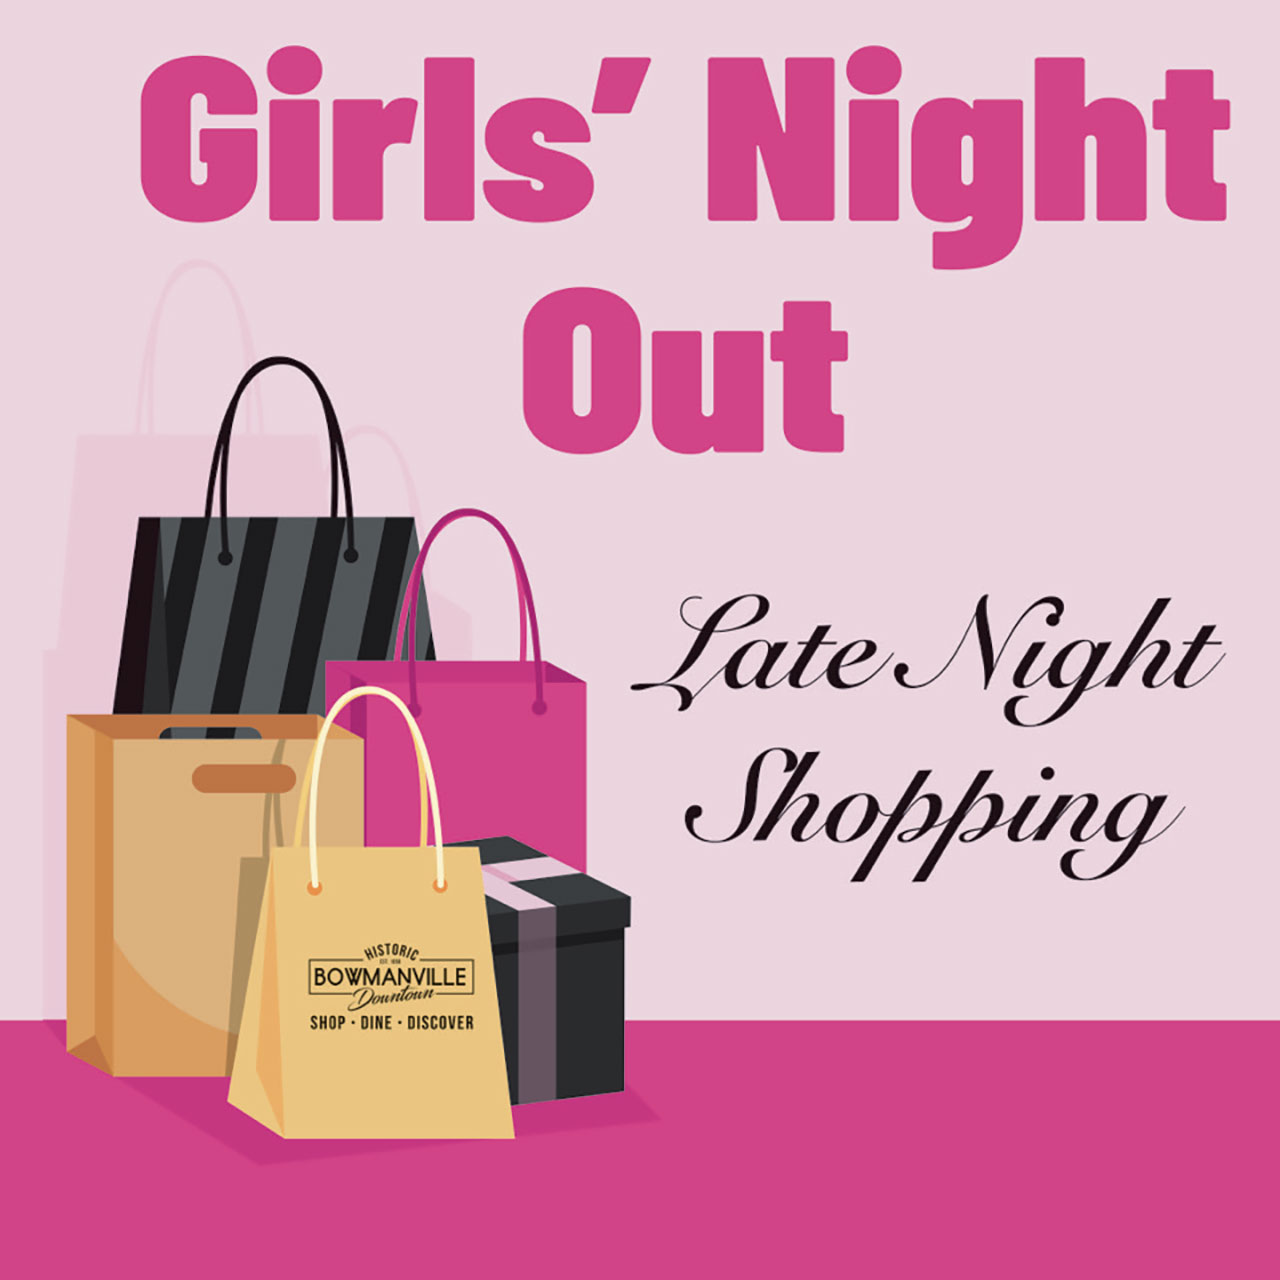 Girl's Night Out